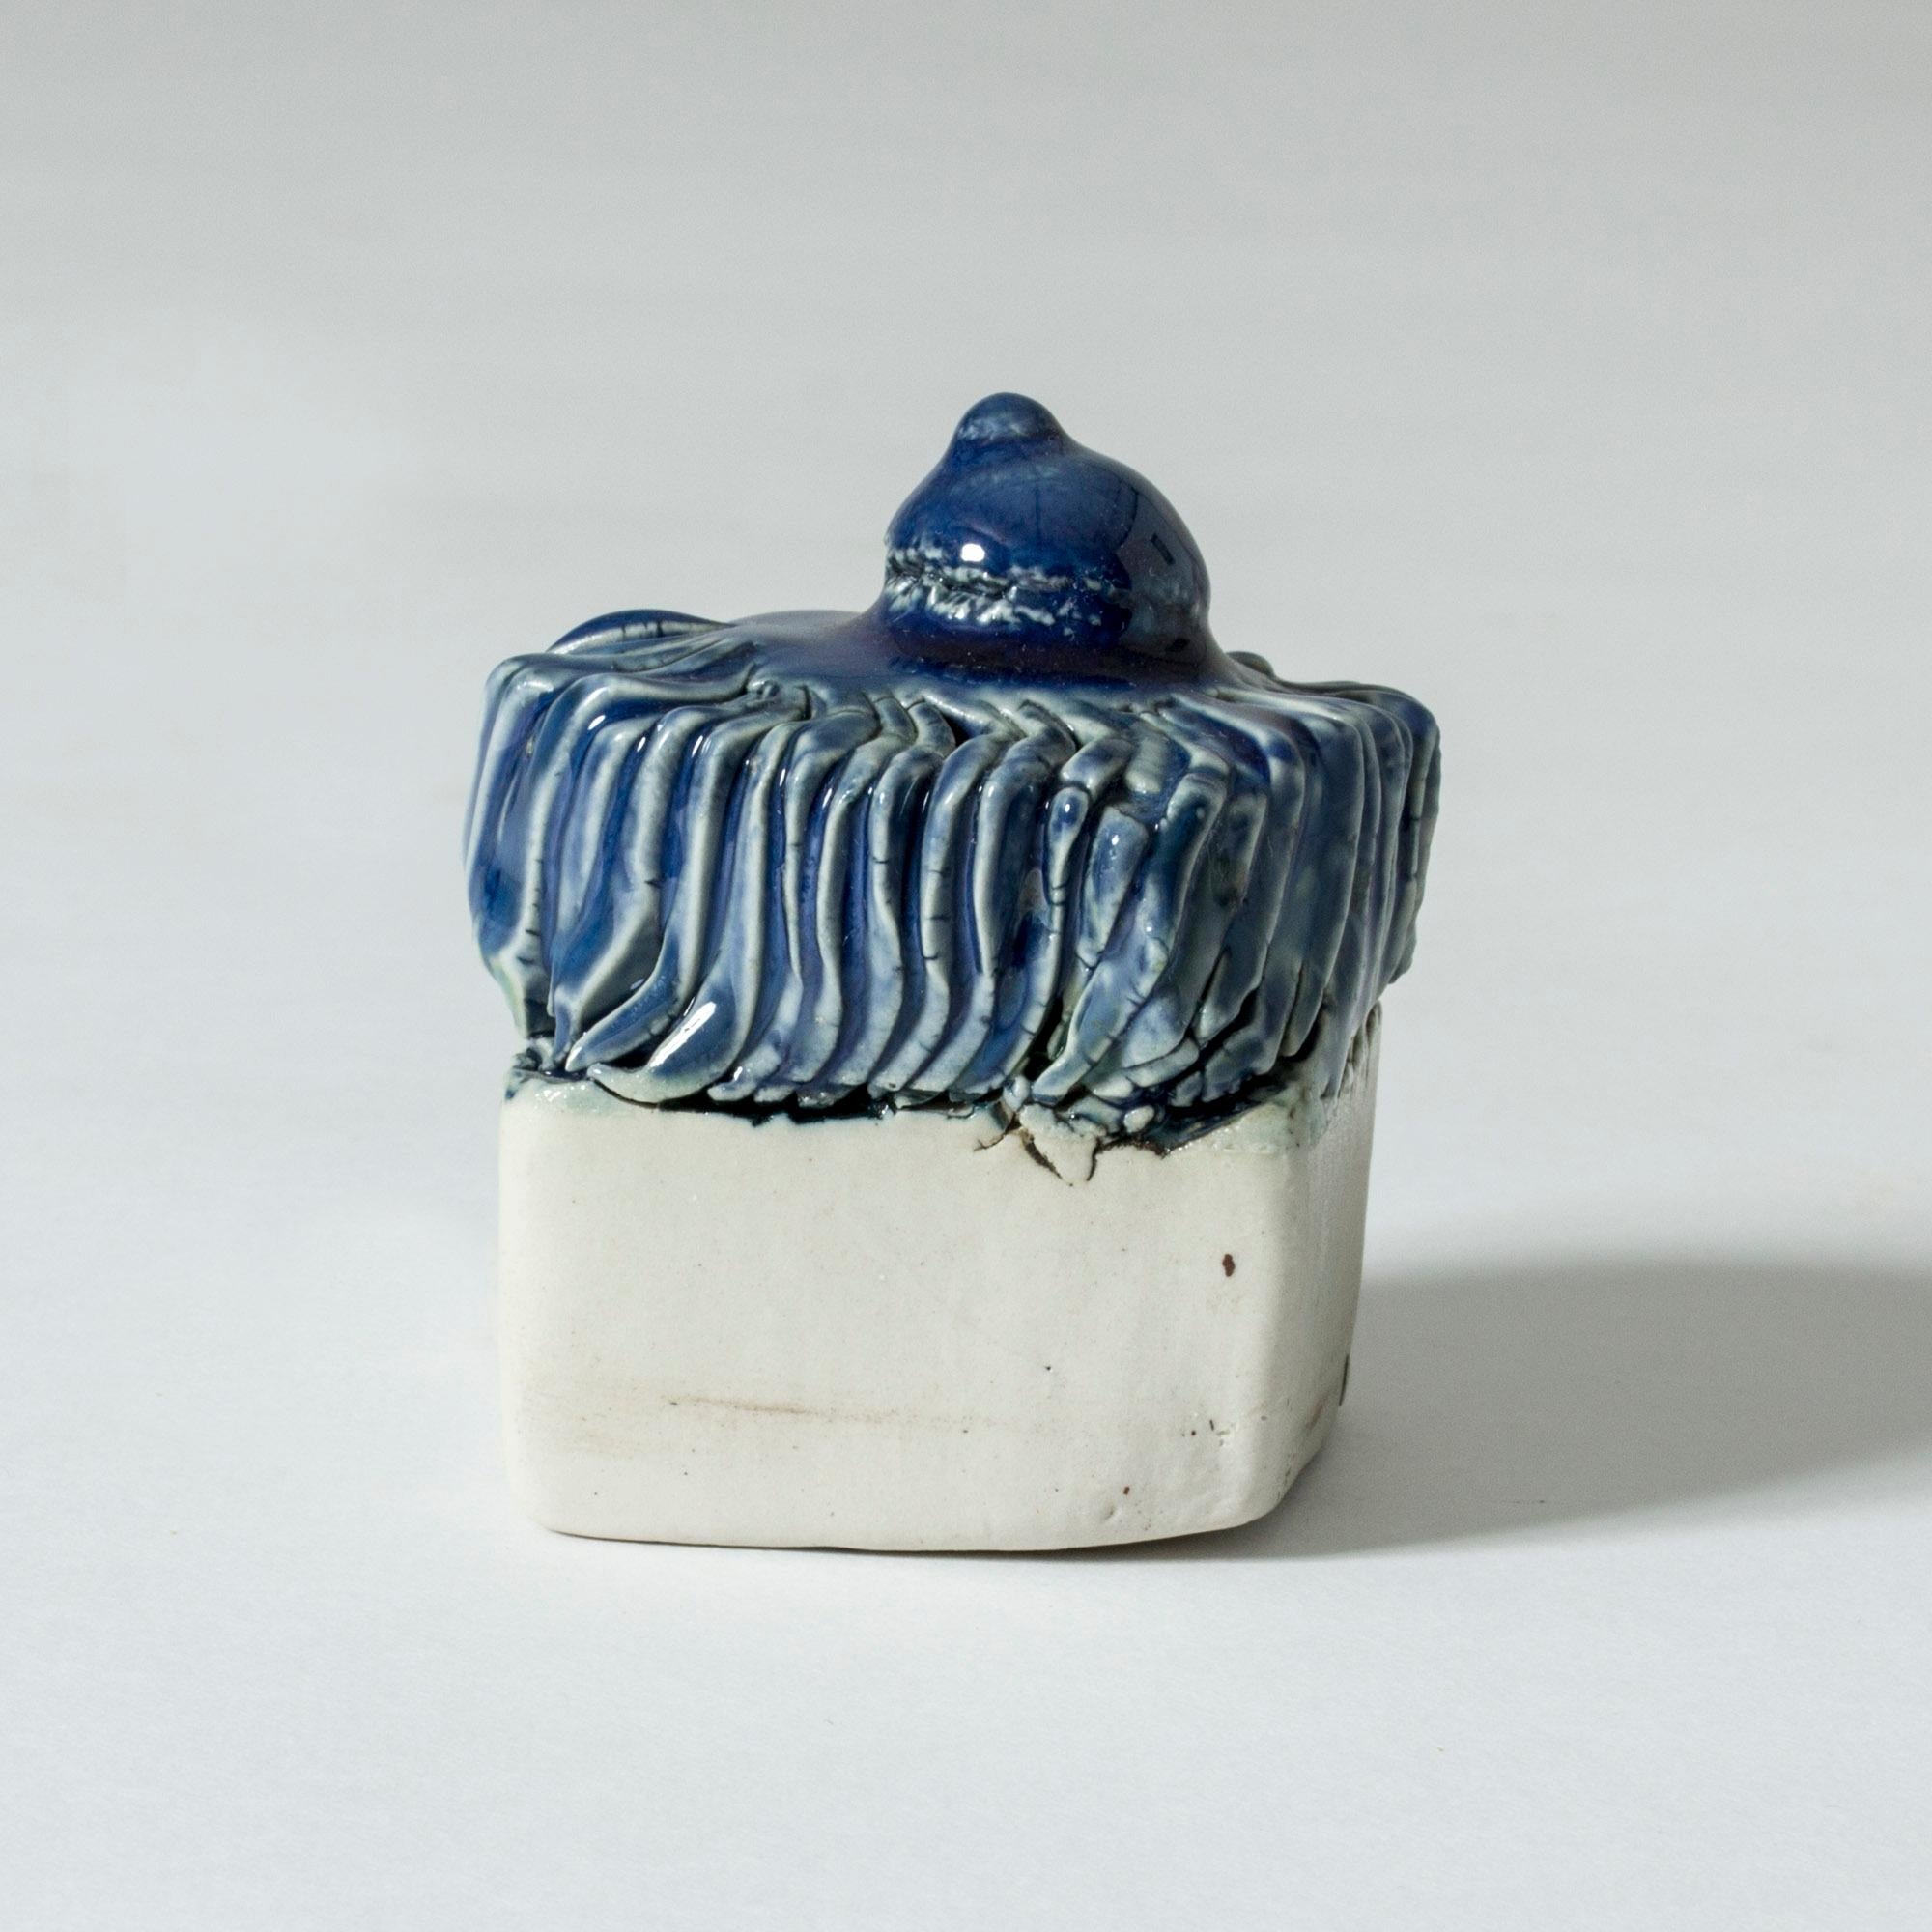 Small stoneware sculpture by Bengt Berglund in a suggestive, whimsical shape, blue glaze on top, unglazed from the middle and down.